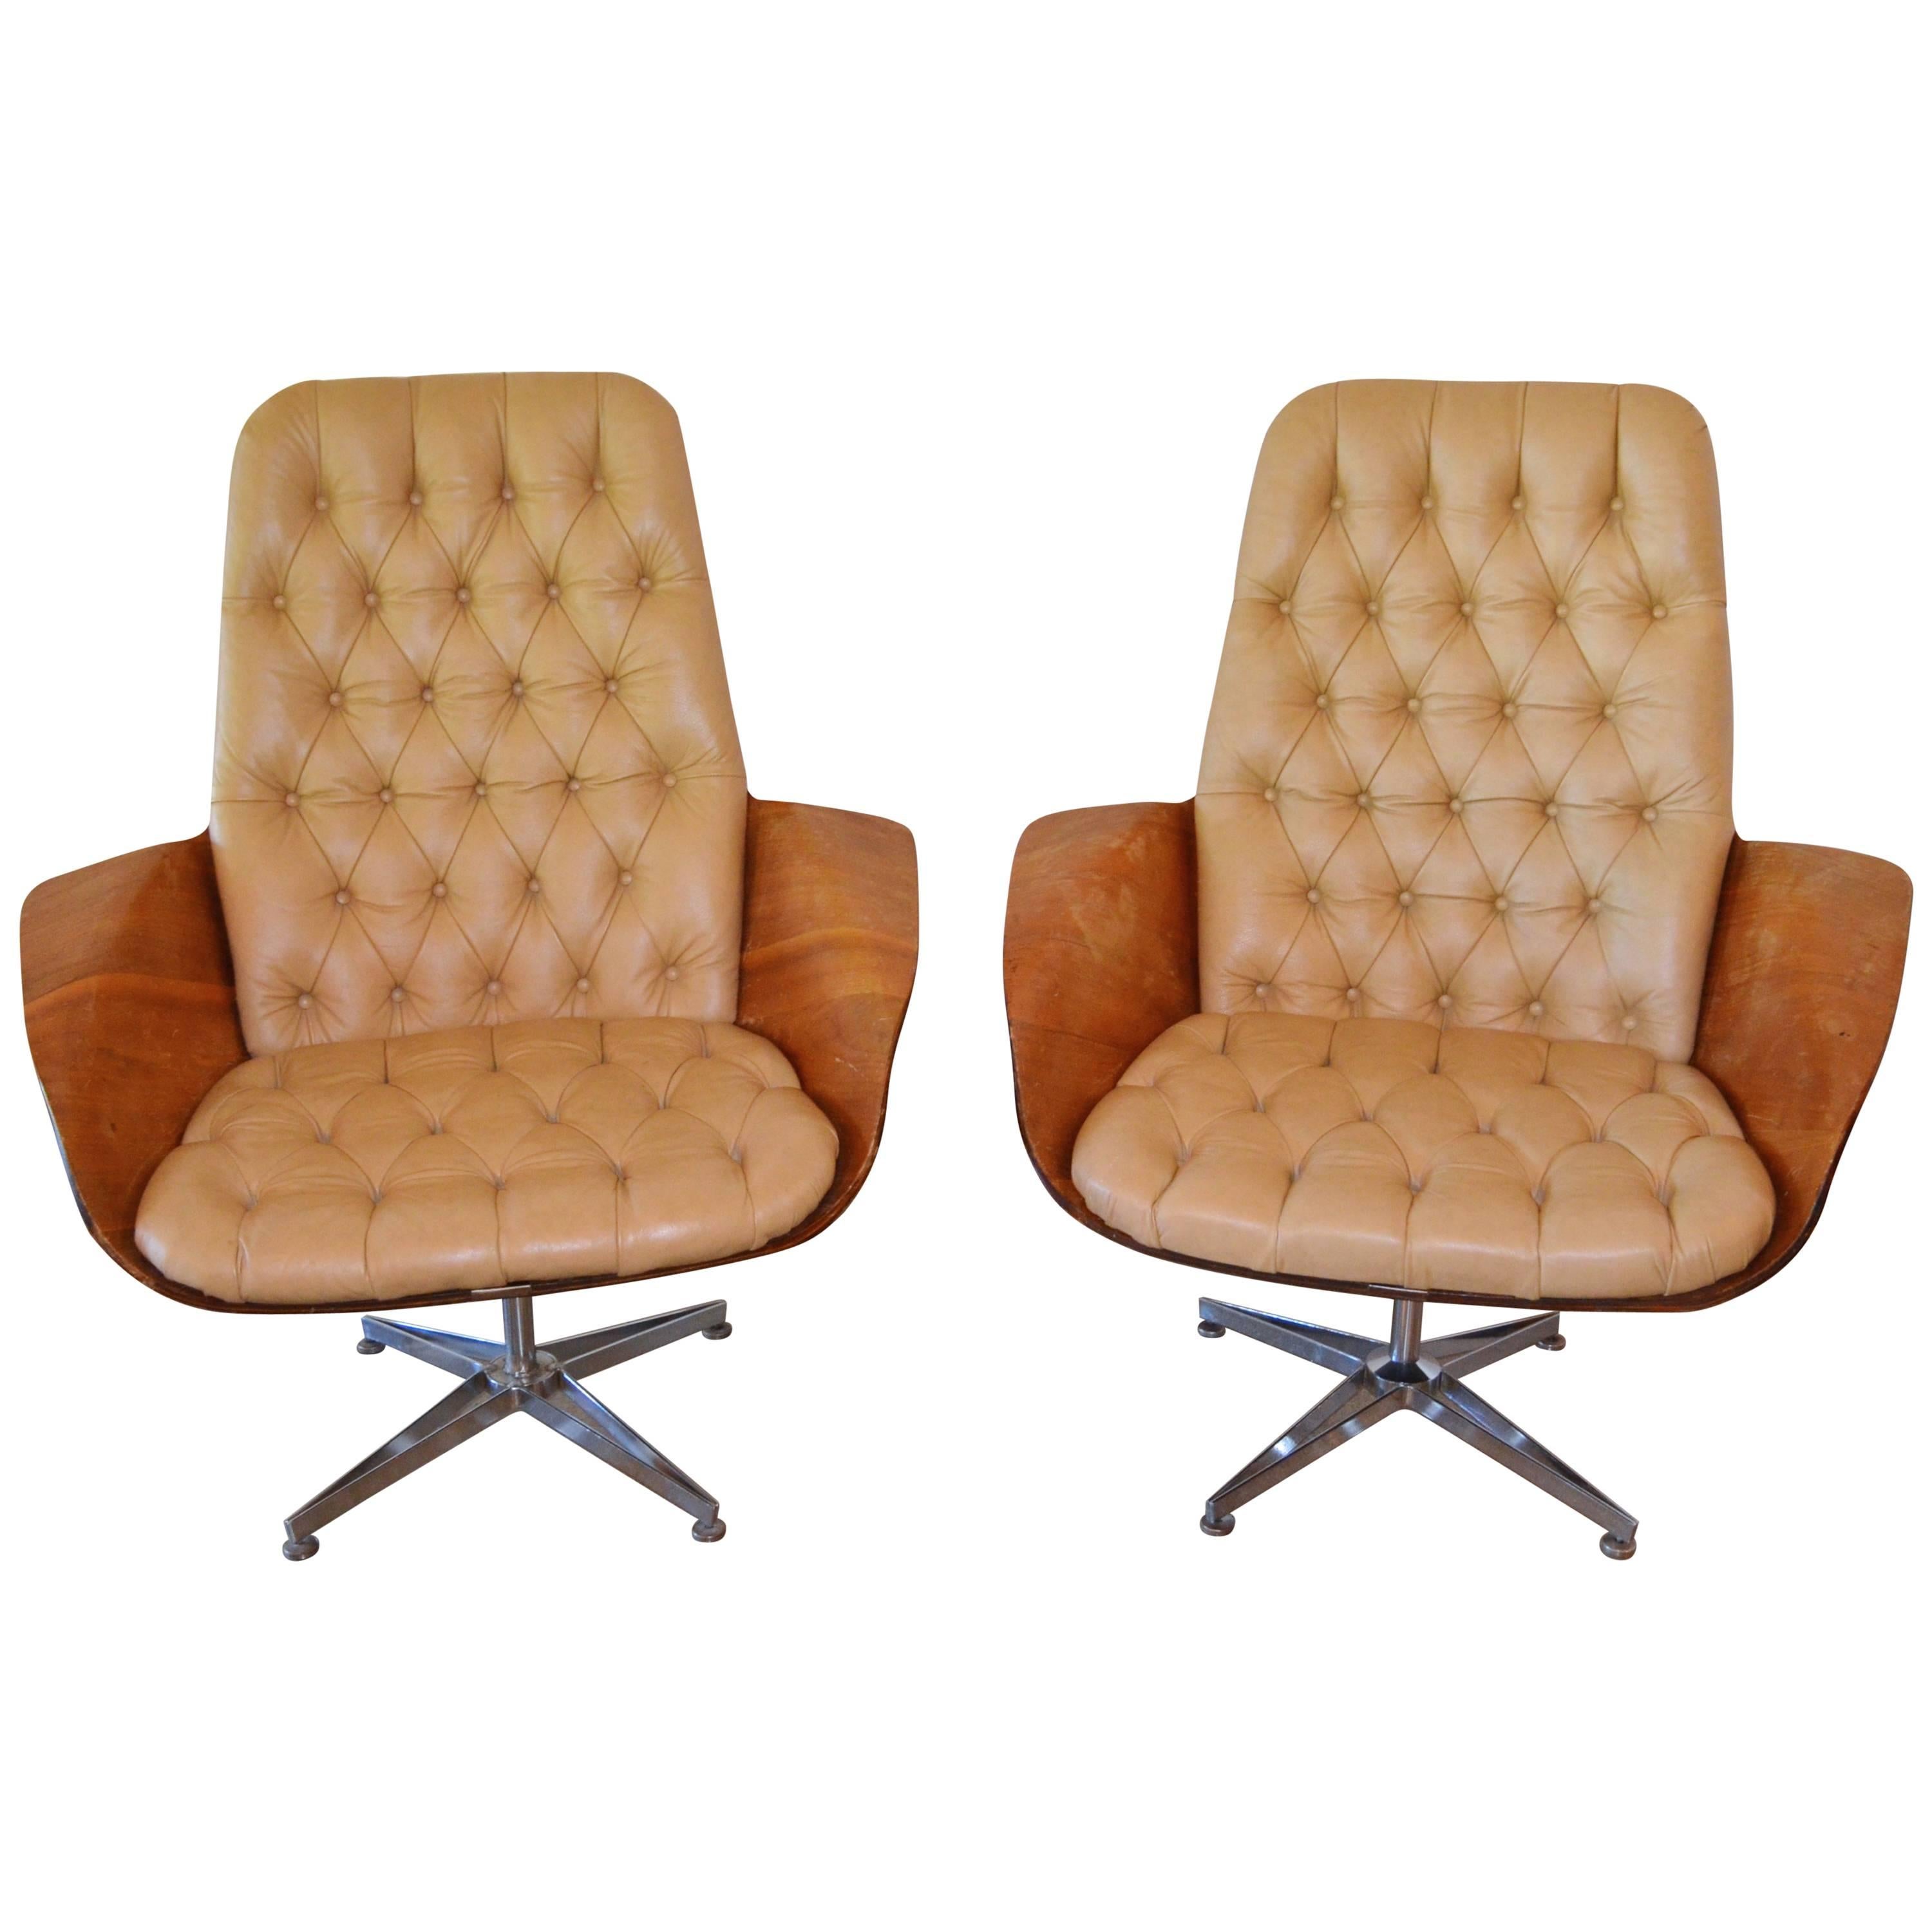 Bentwood and Leather Swivel Chairs by Mulhauser for Plycraft